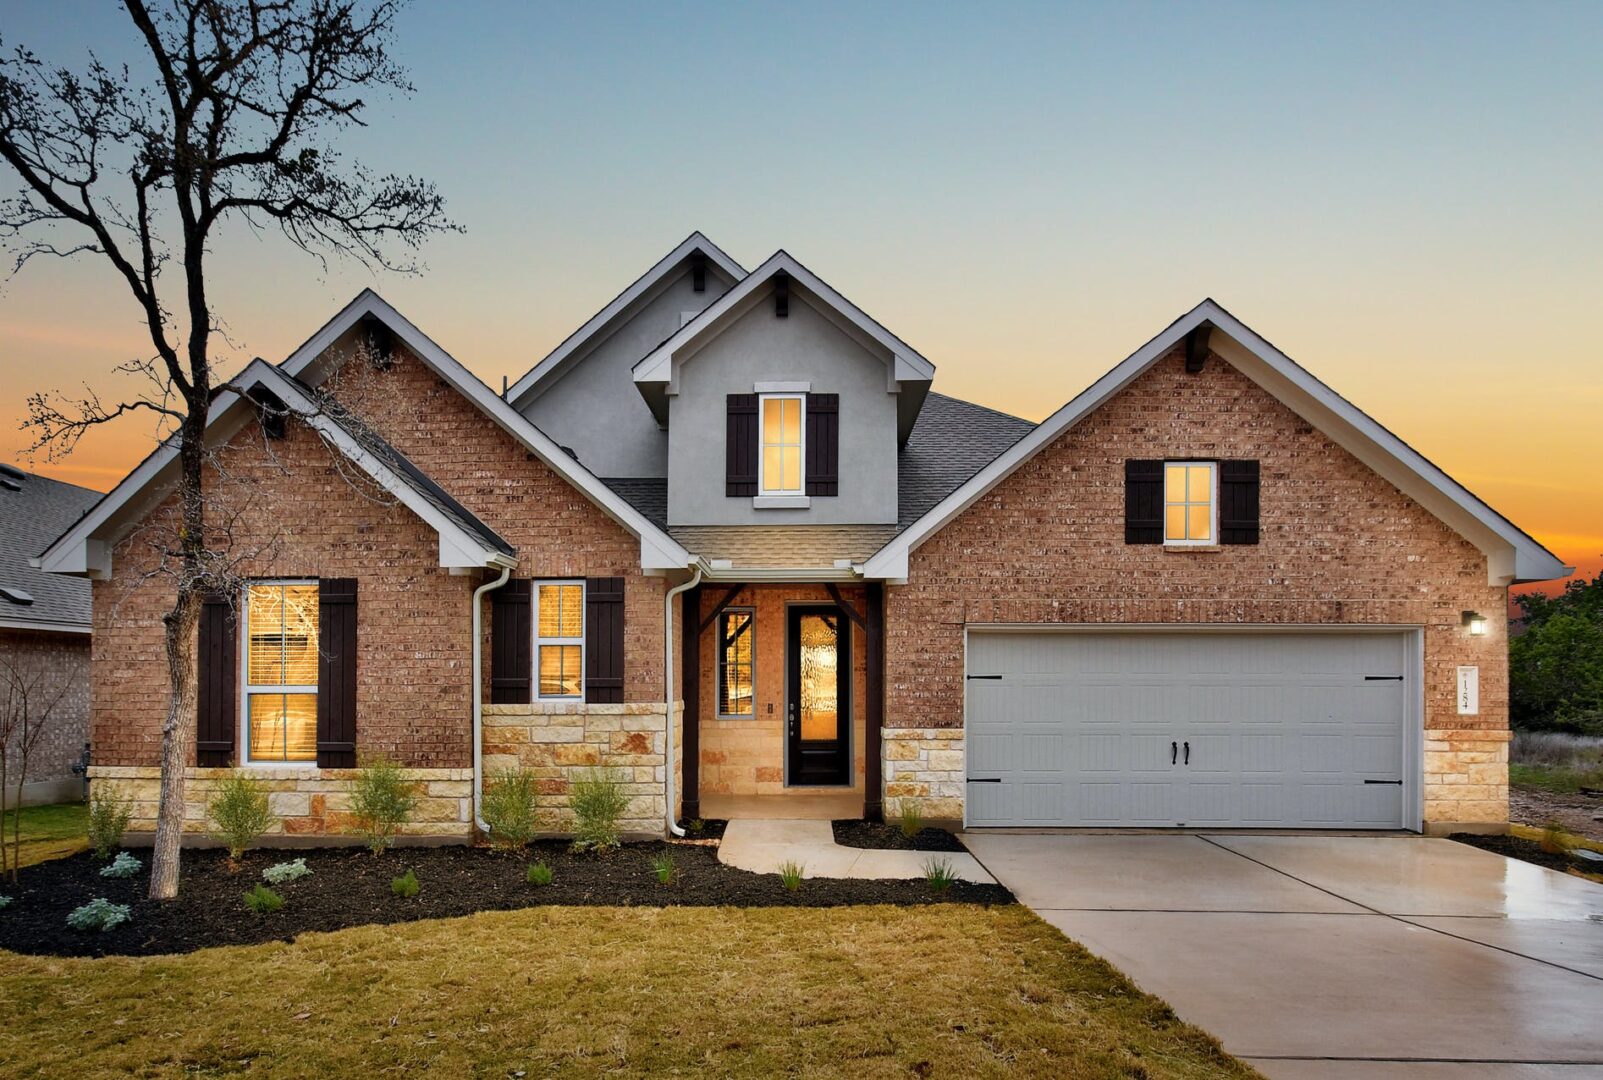 A modern brick house with gray accents and a double garage, illuminated by lights at twilight with a vibrant sunset in the background, expertly crafted by Texas builders.